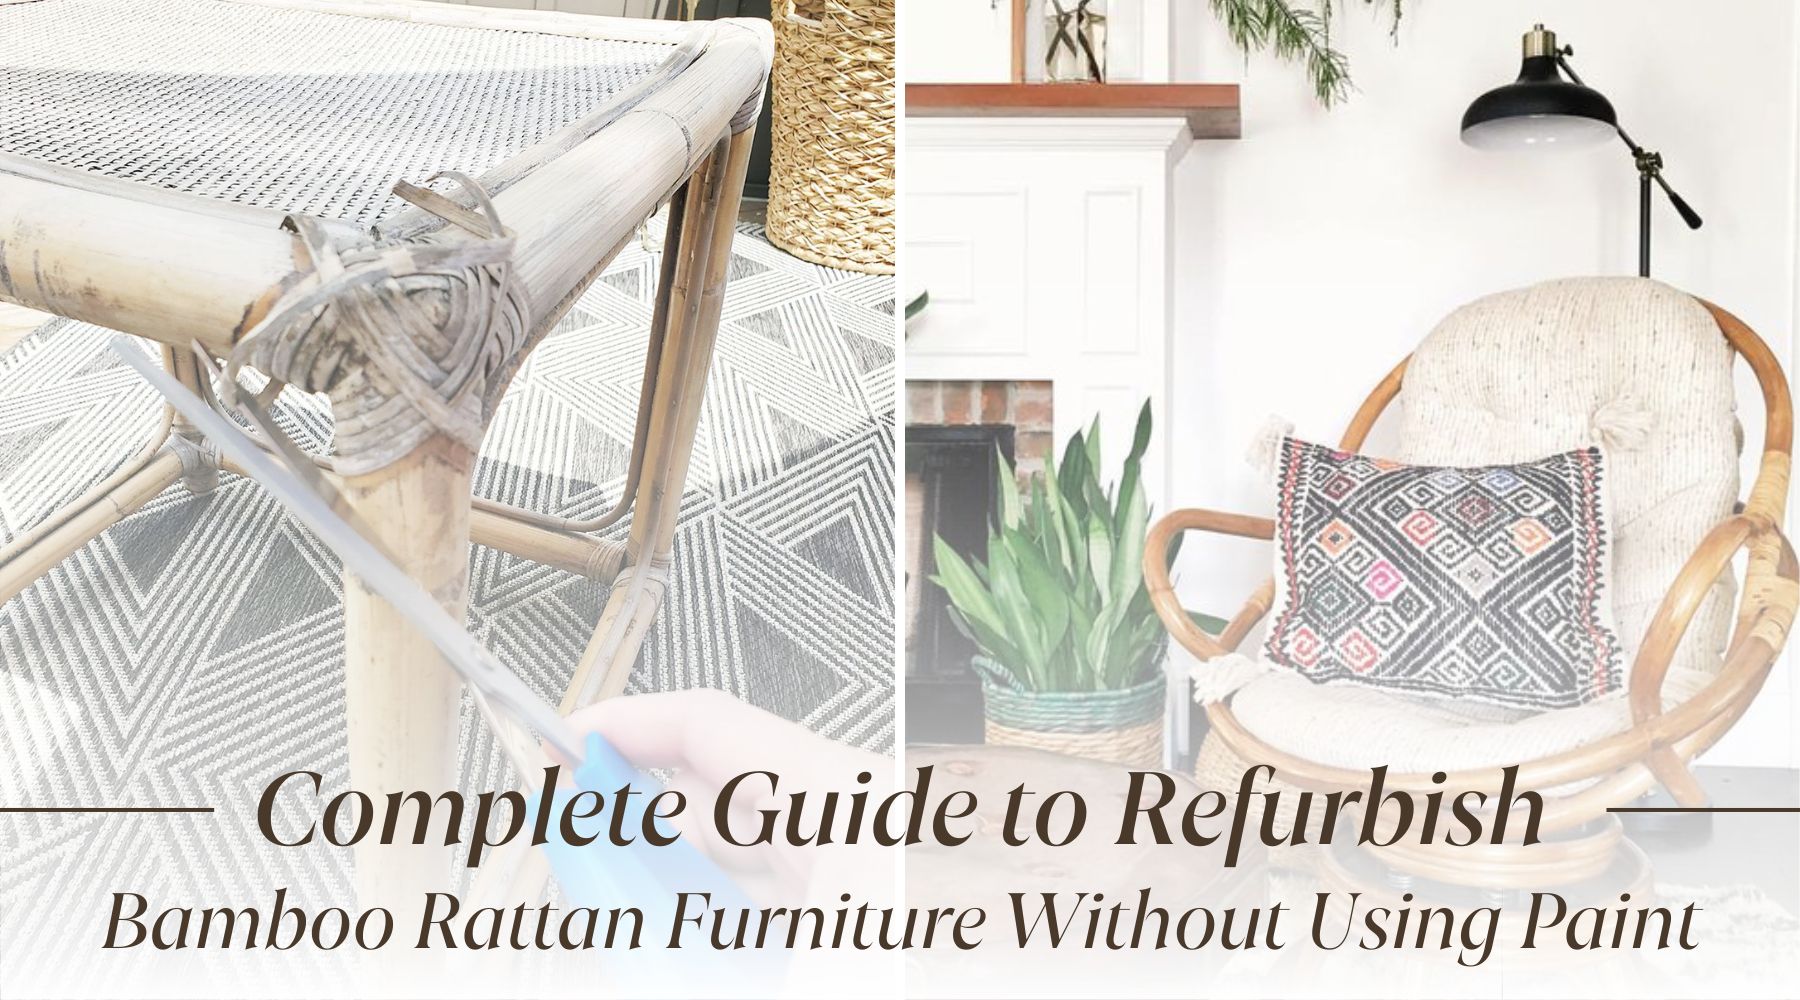 How to Refurbish Bamboo Rattan Furniture Without Using Paint